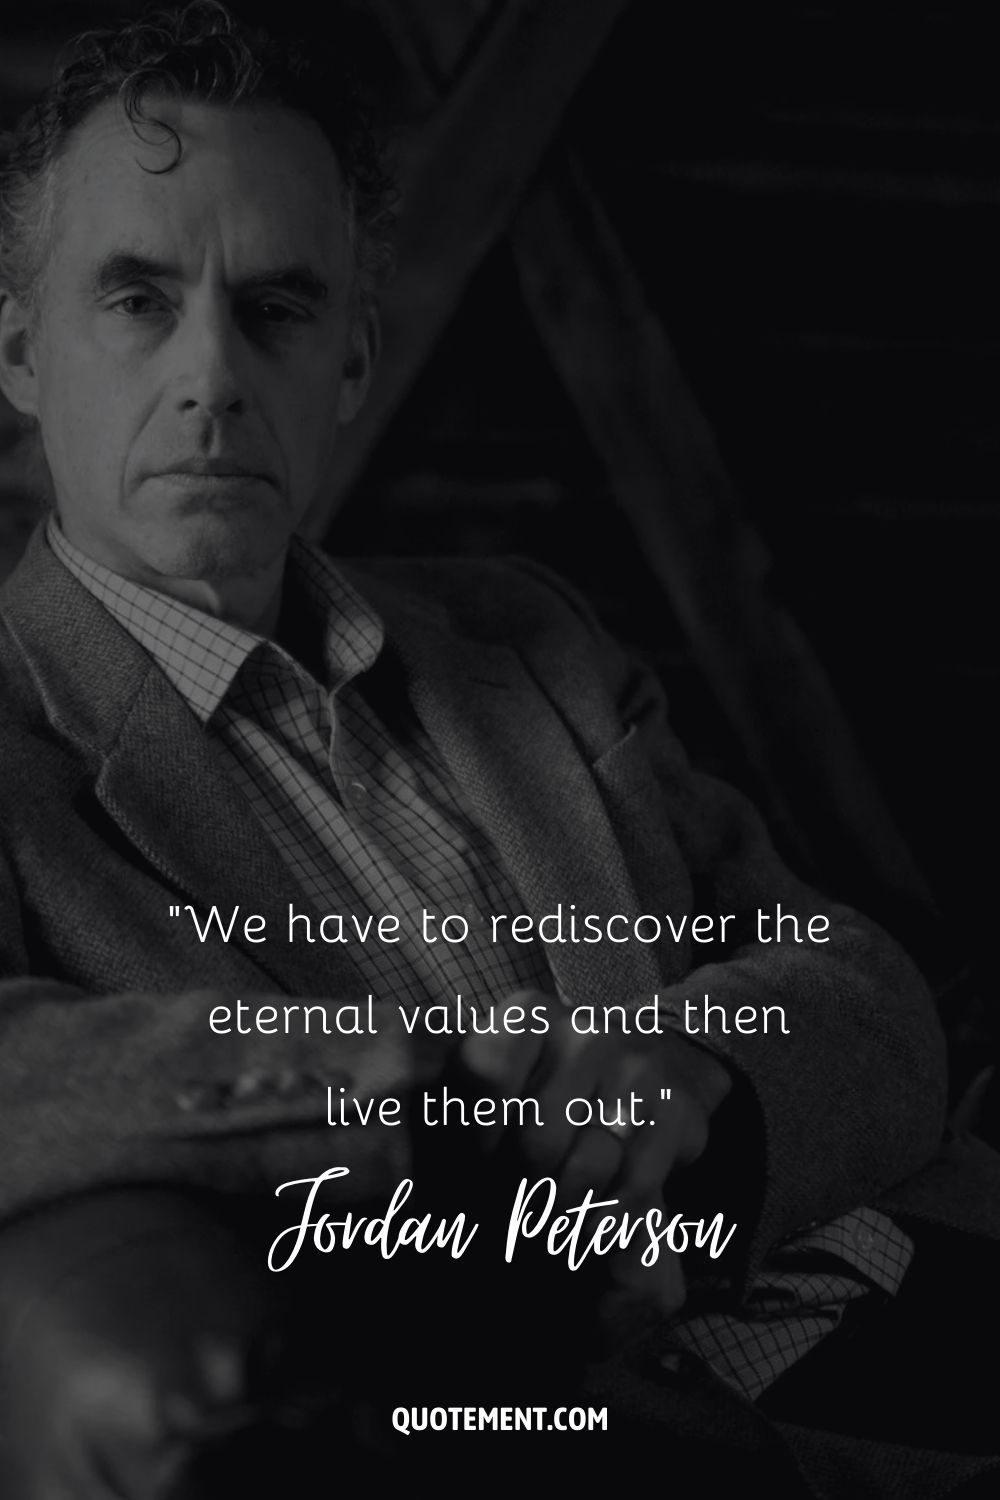 Jordan Peterson quote about rediscovering values.